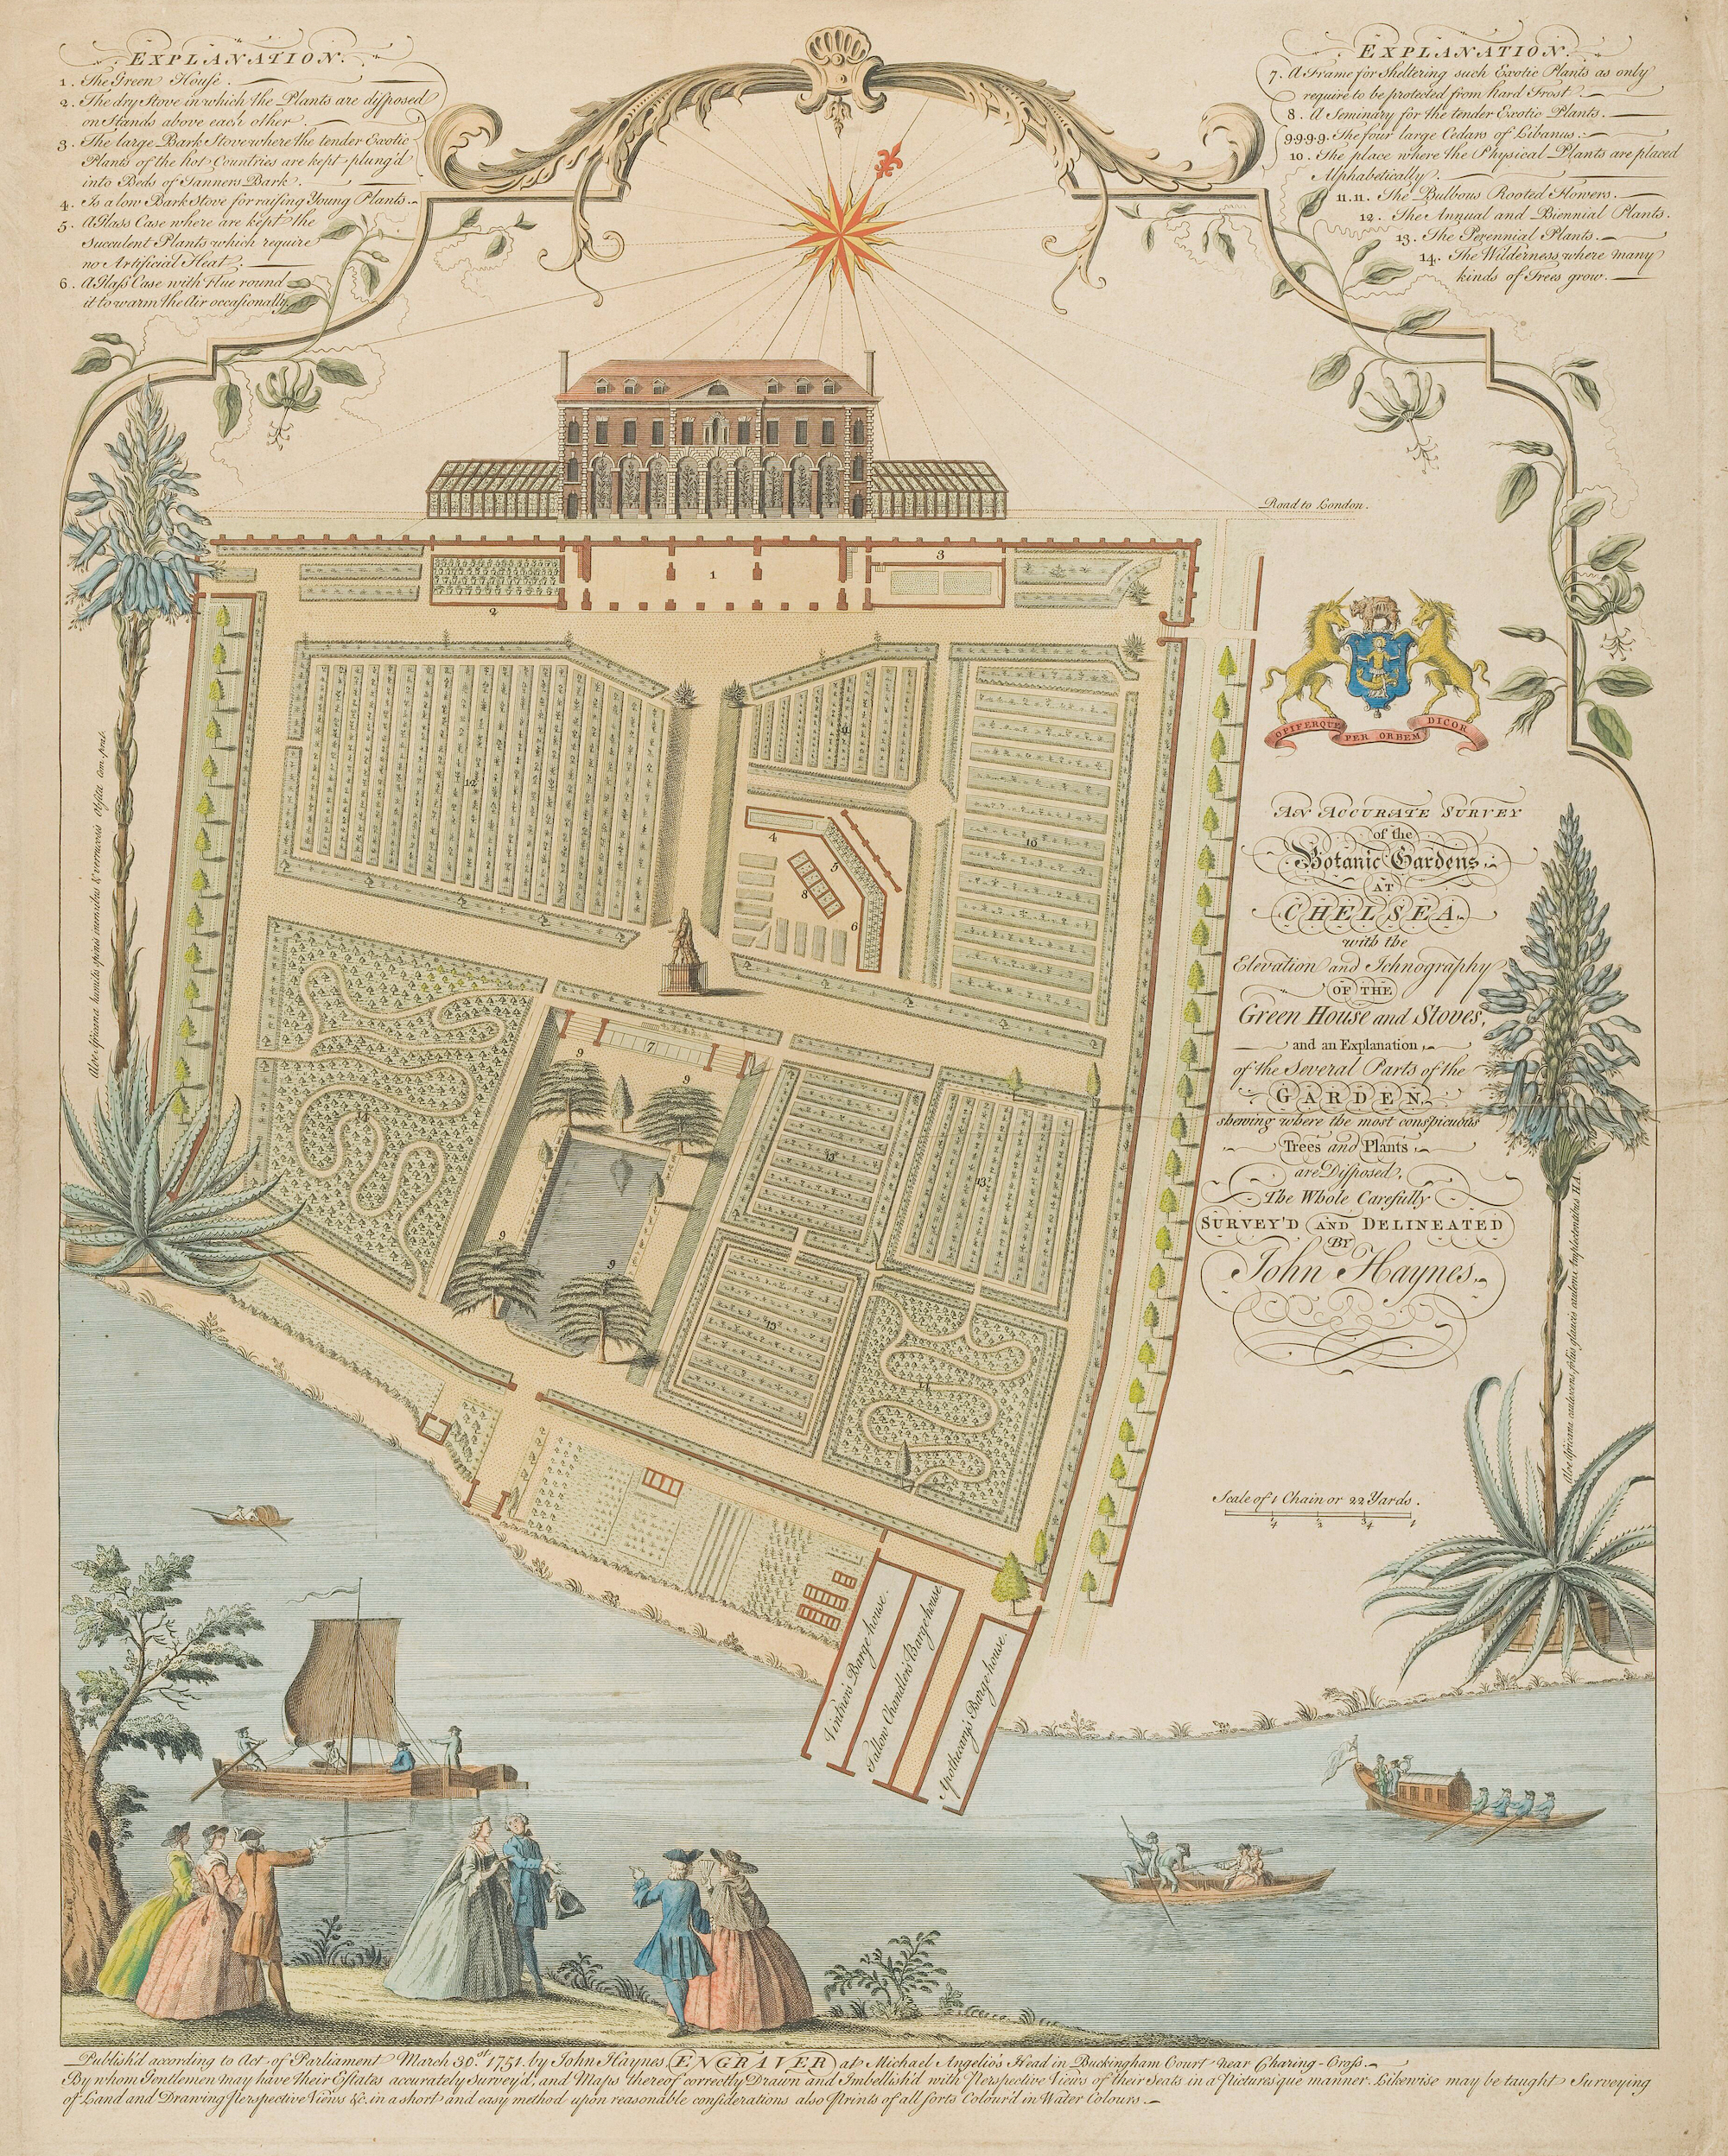 An 18th-century map of the physic garden in Chelsea, London